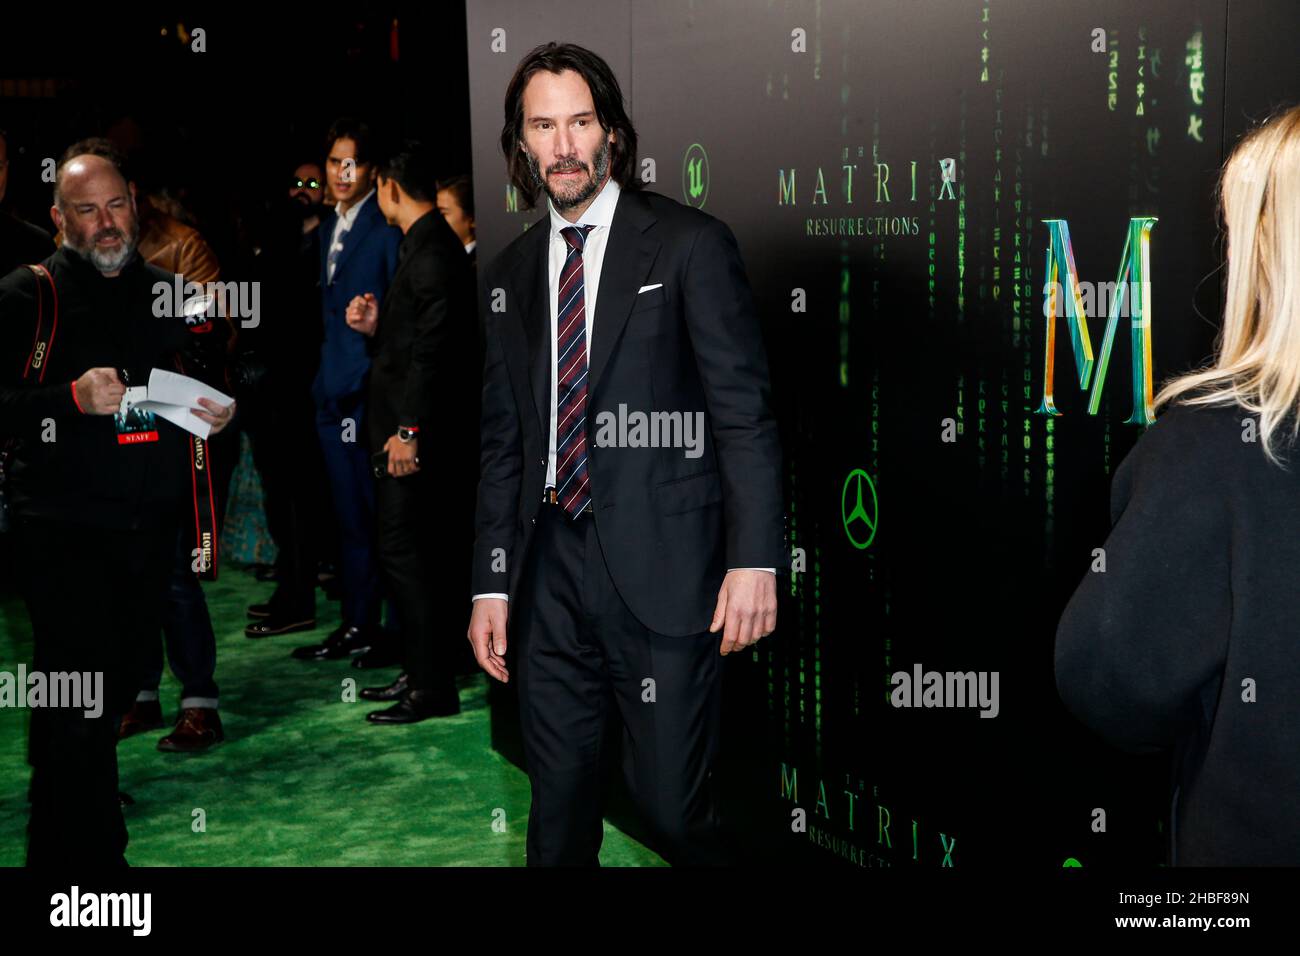 San Francisco, USA. 18th Dec, 2021. Actor Keanu Reeves arrives at the US movie premier of The Matrix Resurrections at the Castro Theater on December, 18, 2021 in San Francisco, California. (Photo by Christopher Victorio/imageSPACE./Sipa USA) Credit: Sipa USA/Alamy Live News Stock Photo